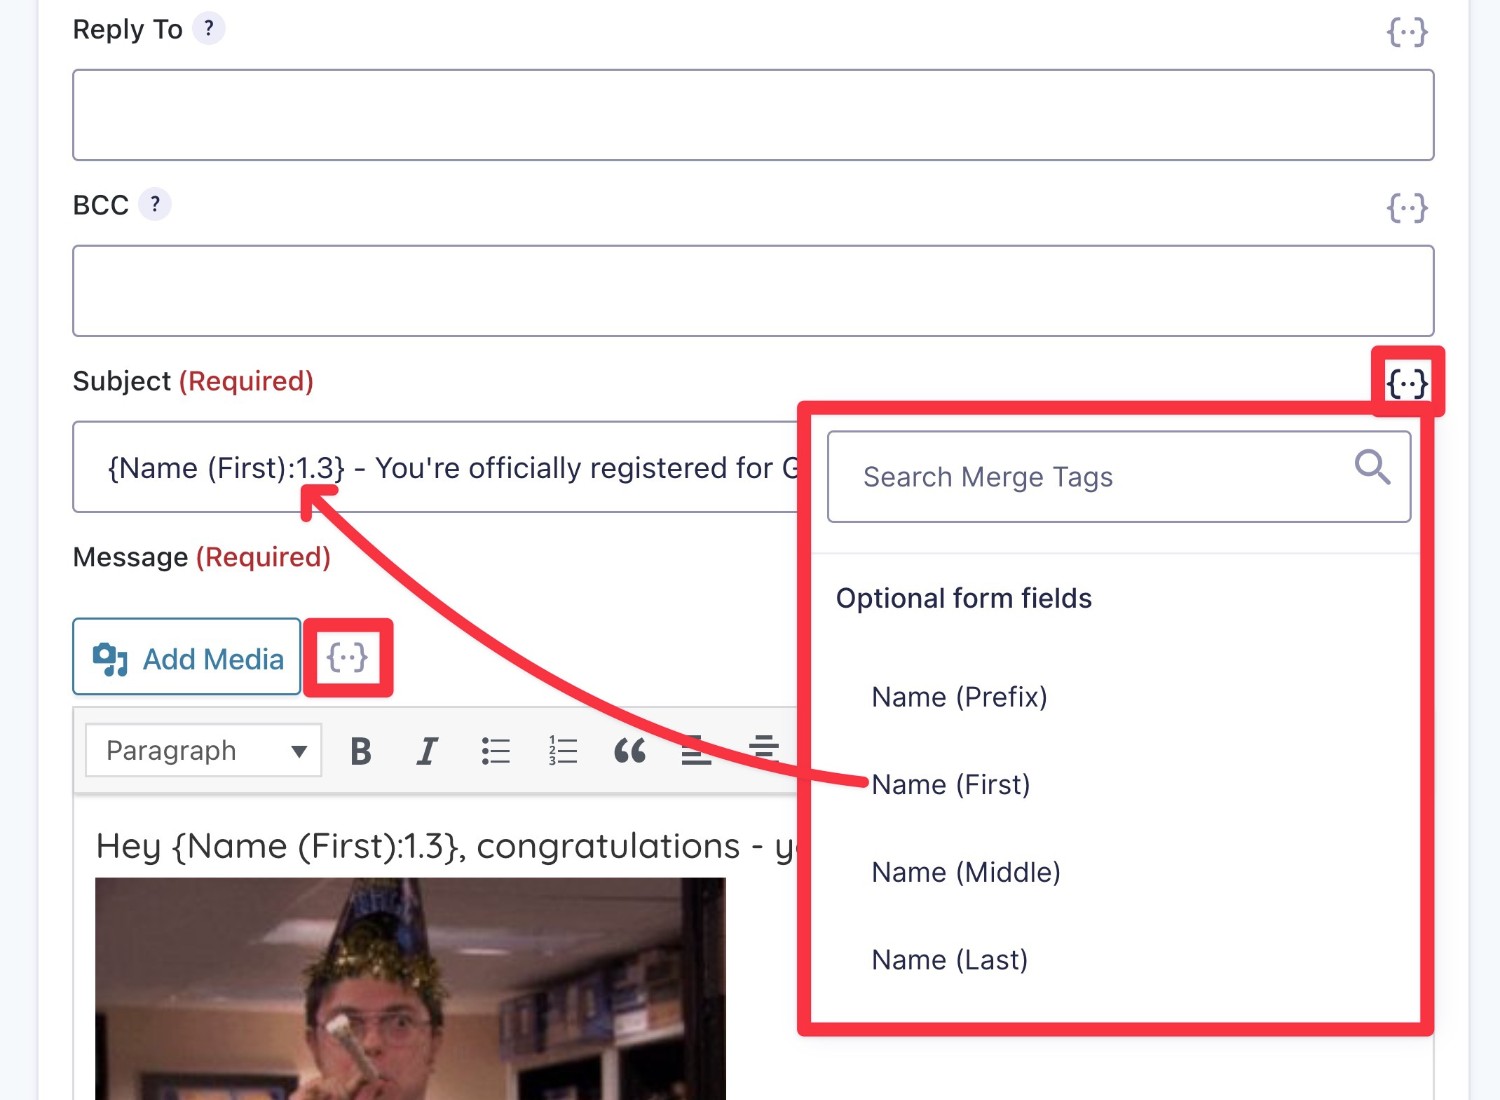 How to use merge tags to personalize your emails